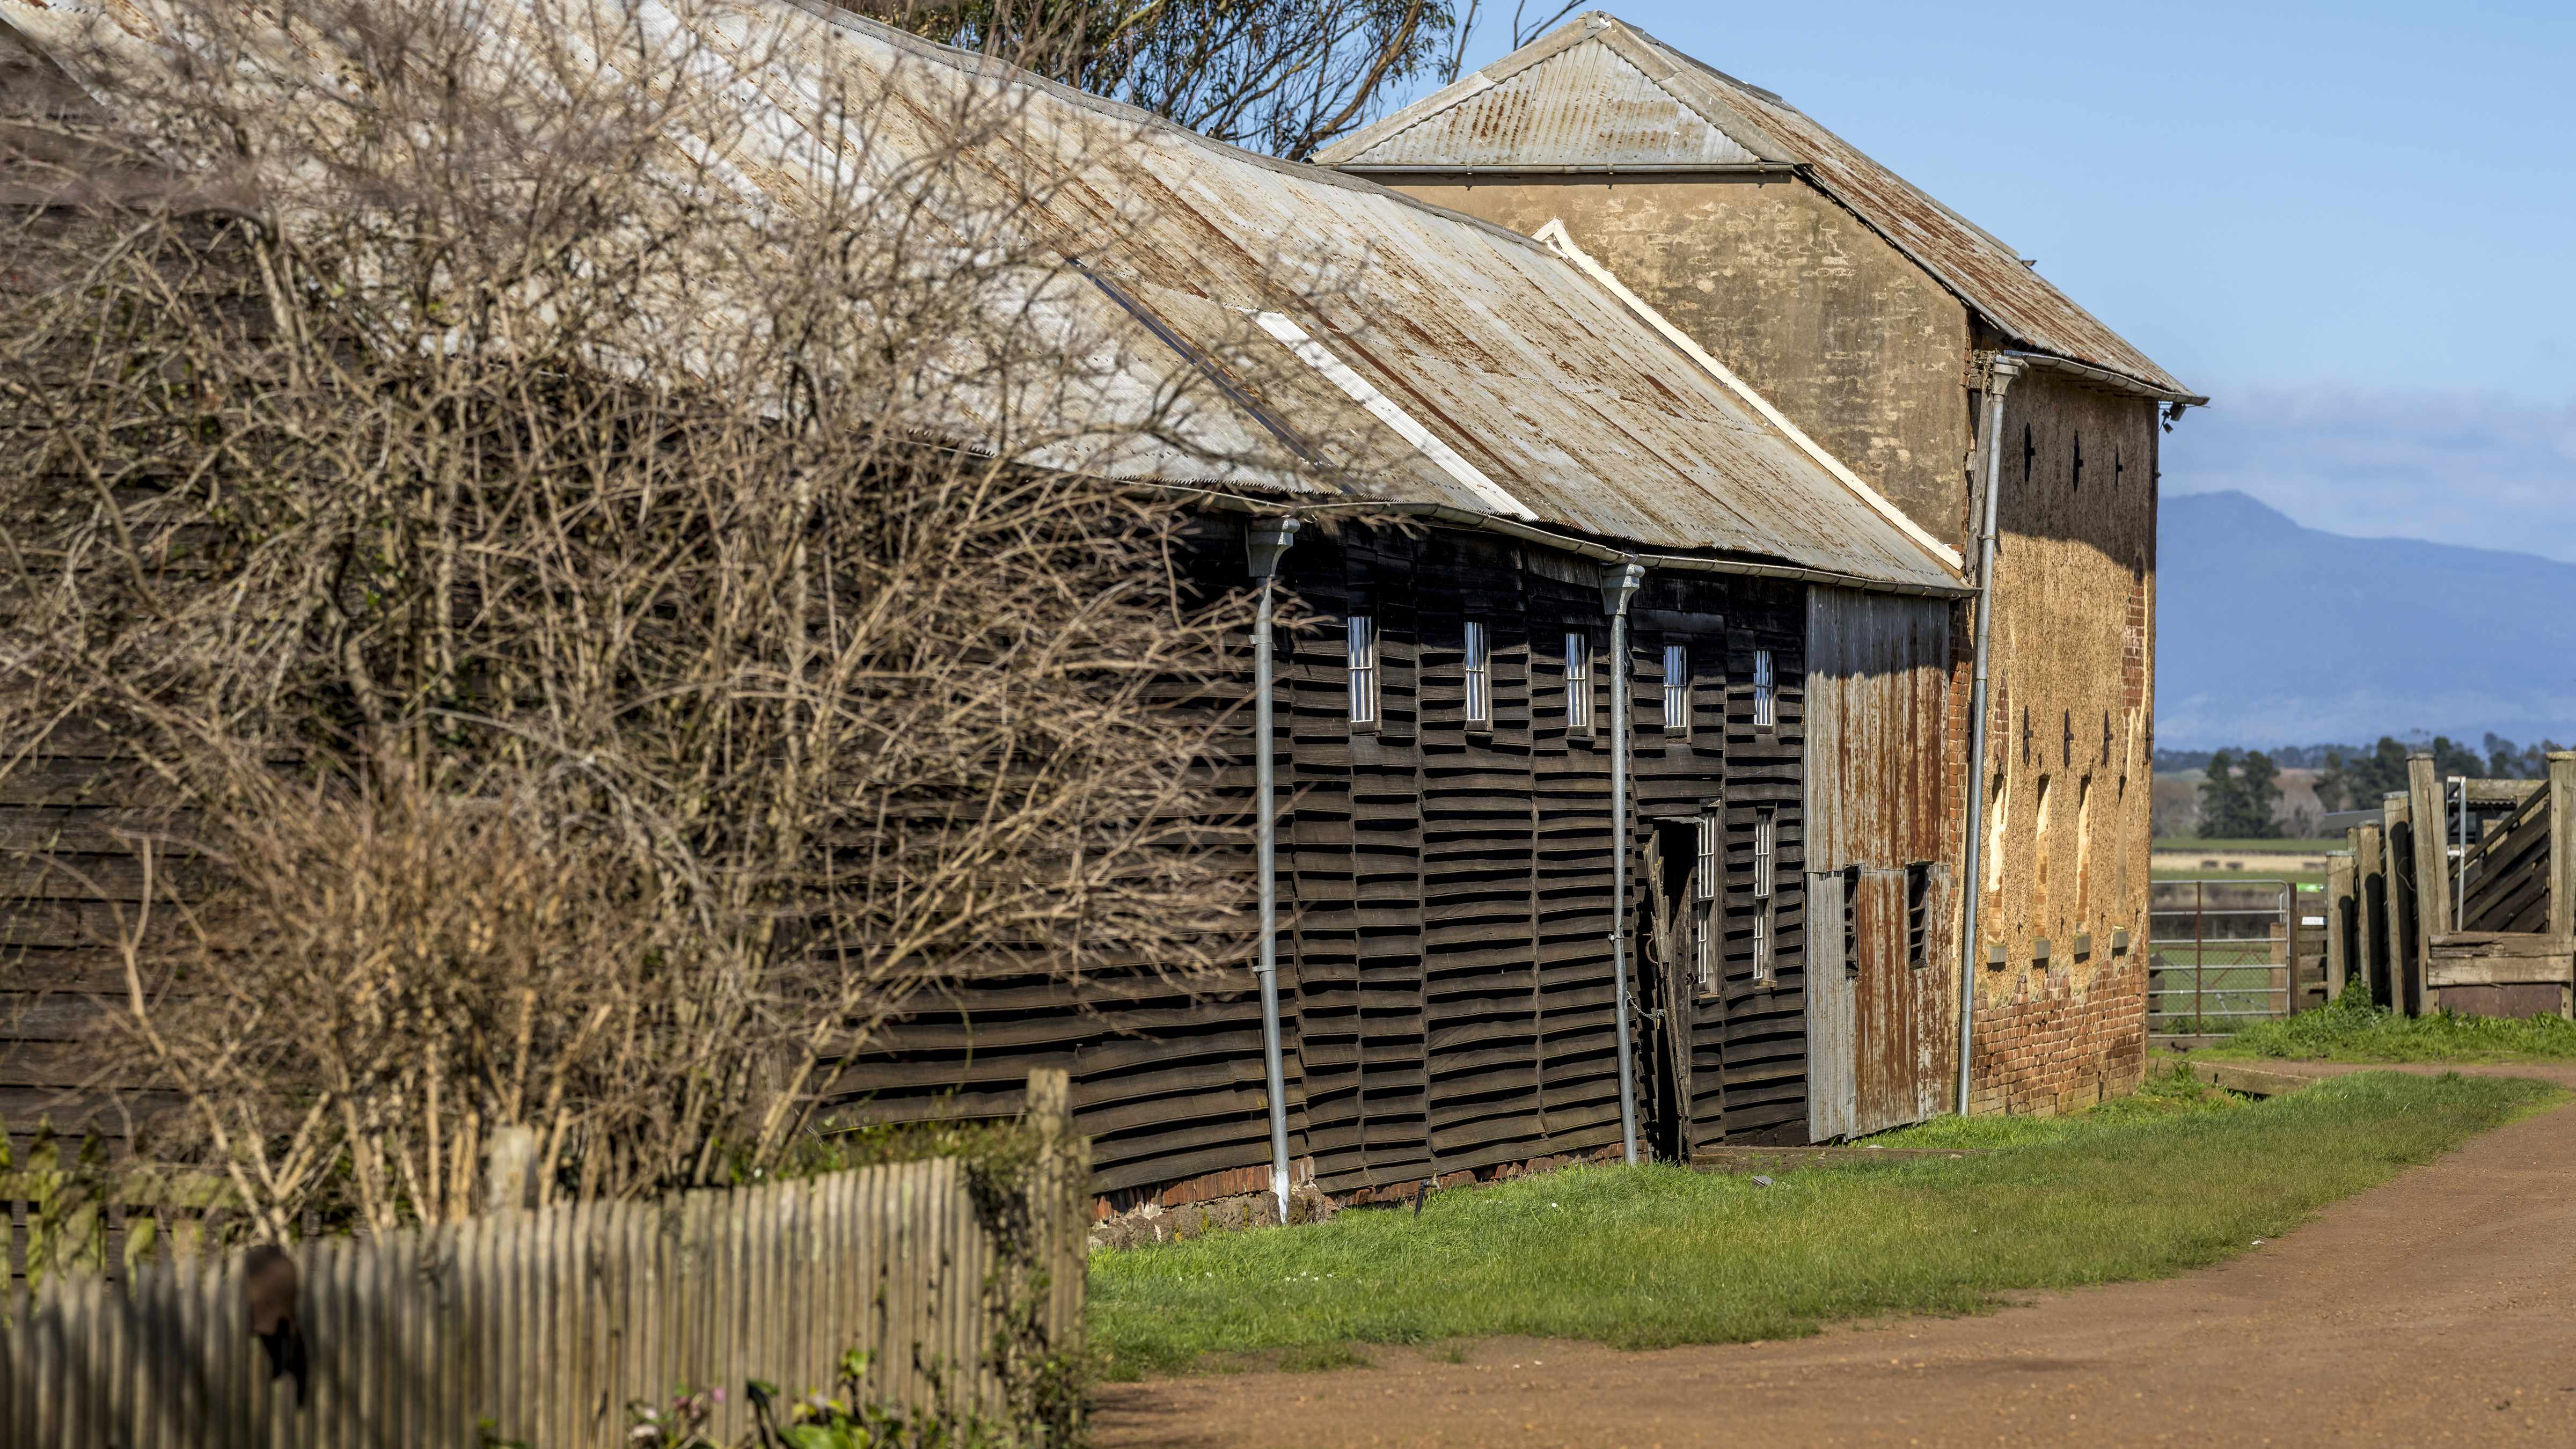 The Farm Village streetscape showing the horizontal weatherboards of the draught horse stables, shearing shed and brick granary. Photo: Rob Burnett.